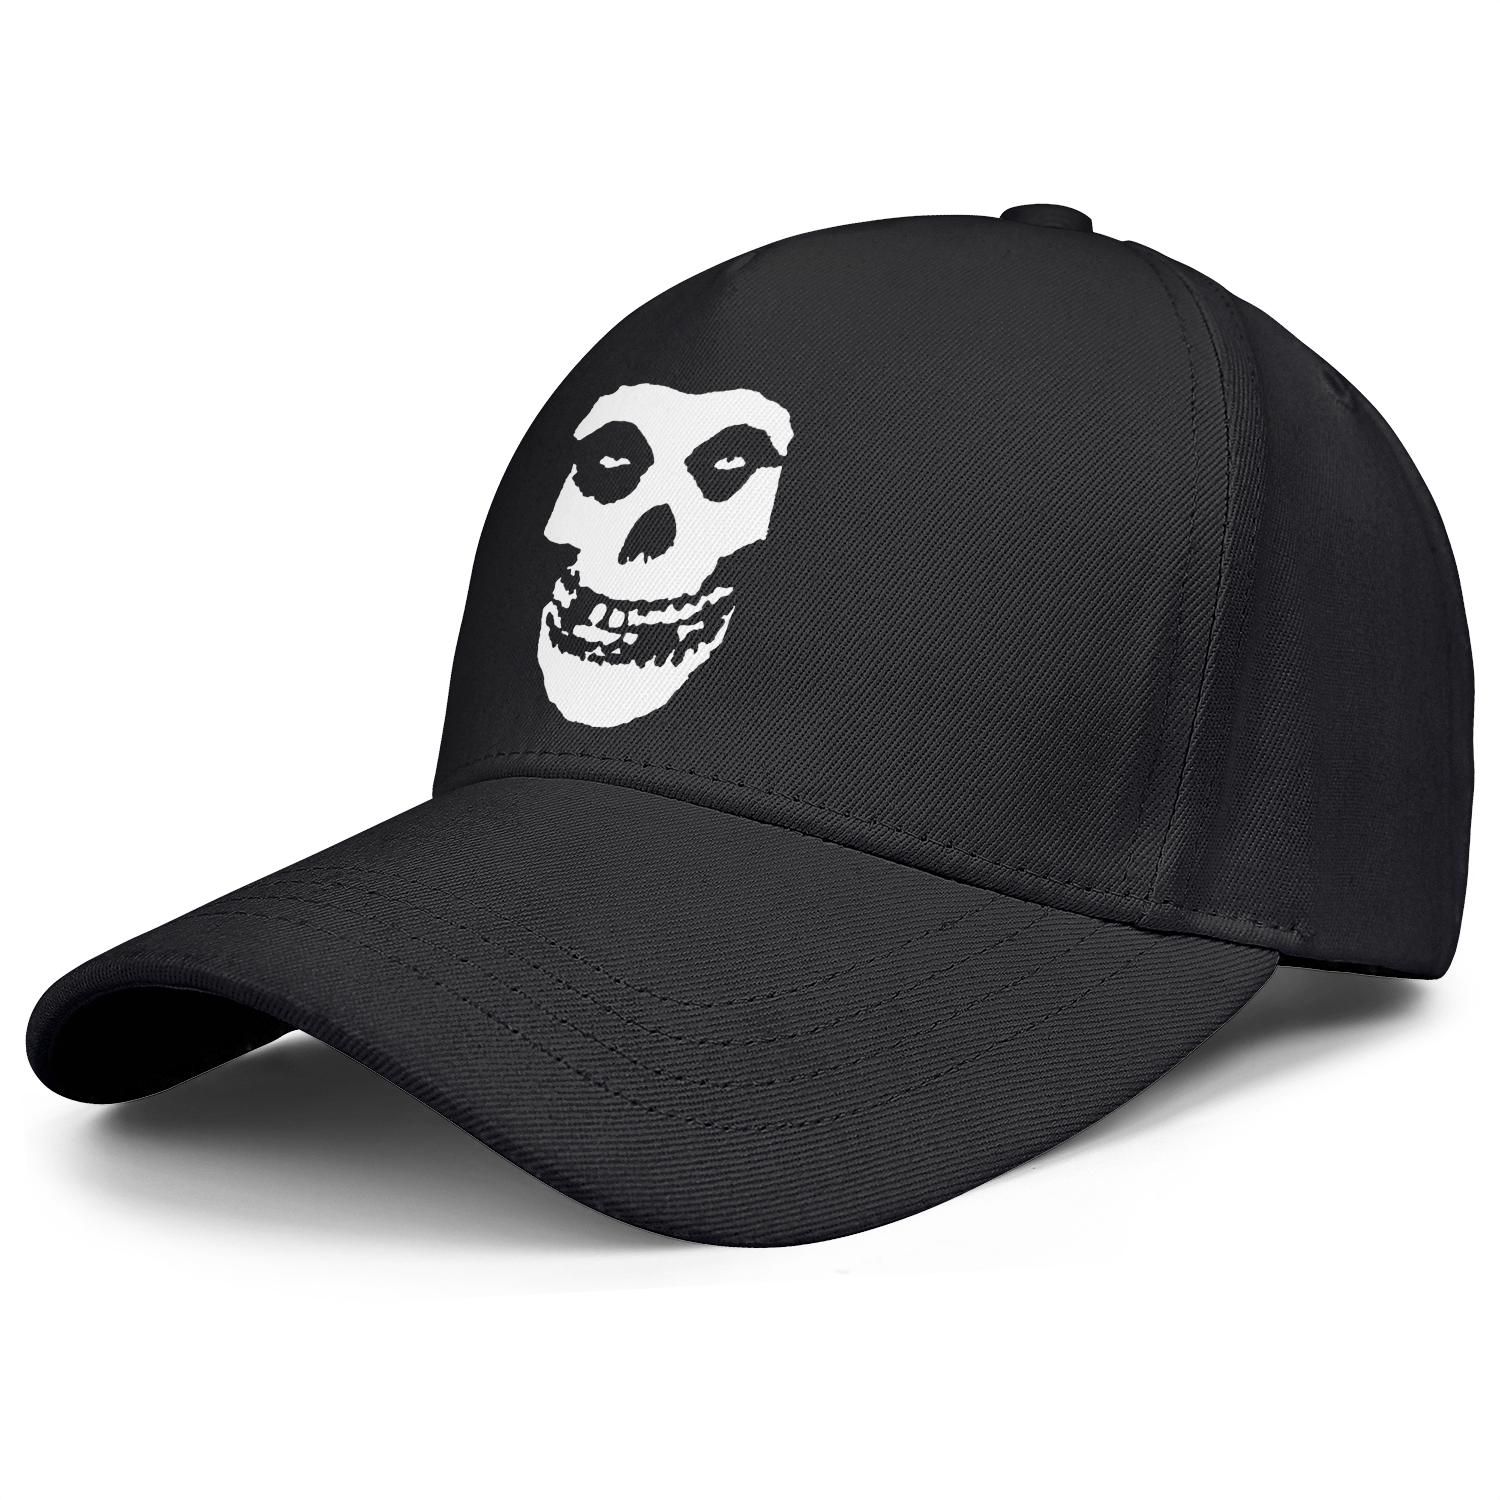 Danzig Designs Misfits Fiend Skull Black Mens And Women Baseball Cap Design  Designer Golf Cool Fitted Custom Unique Classic Hats Ghost From Bmw8090,  $13.87 | DHgate.Com